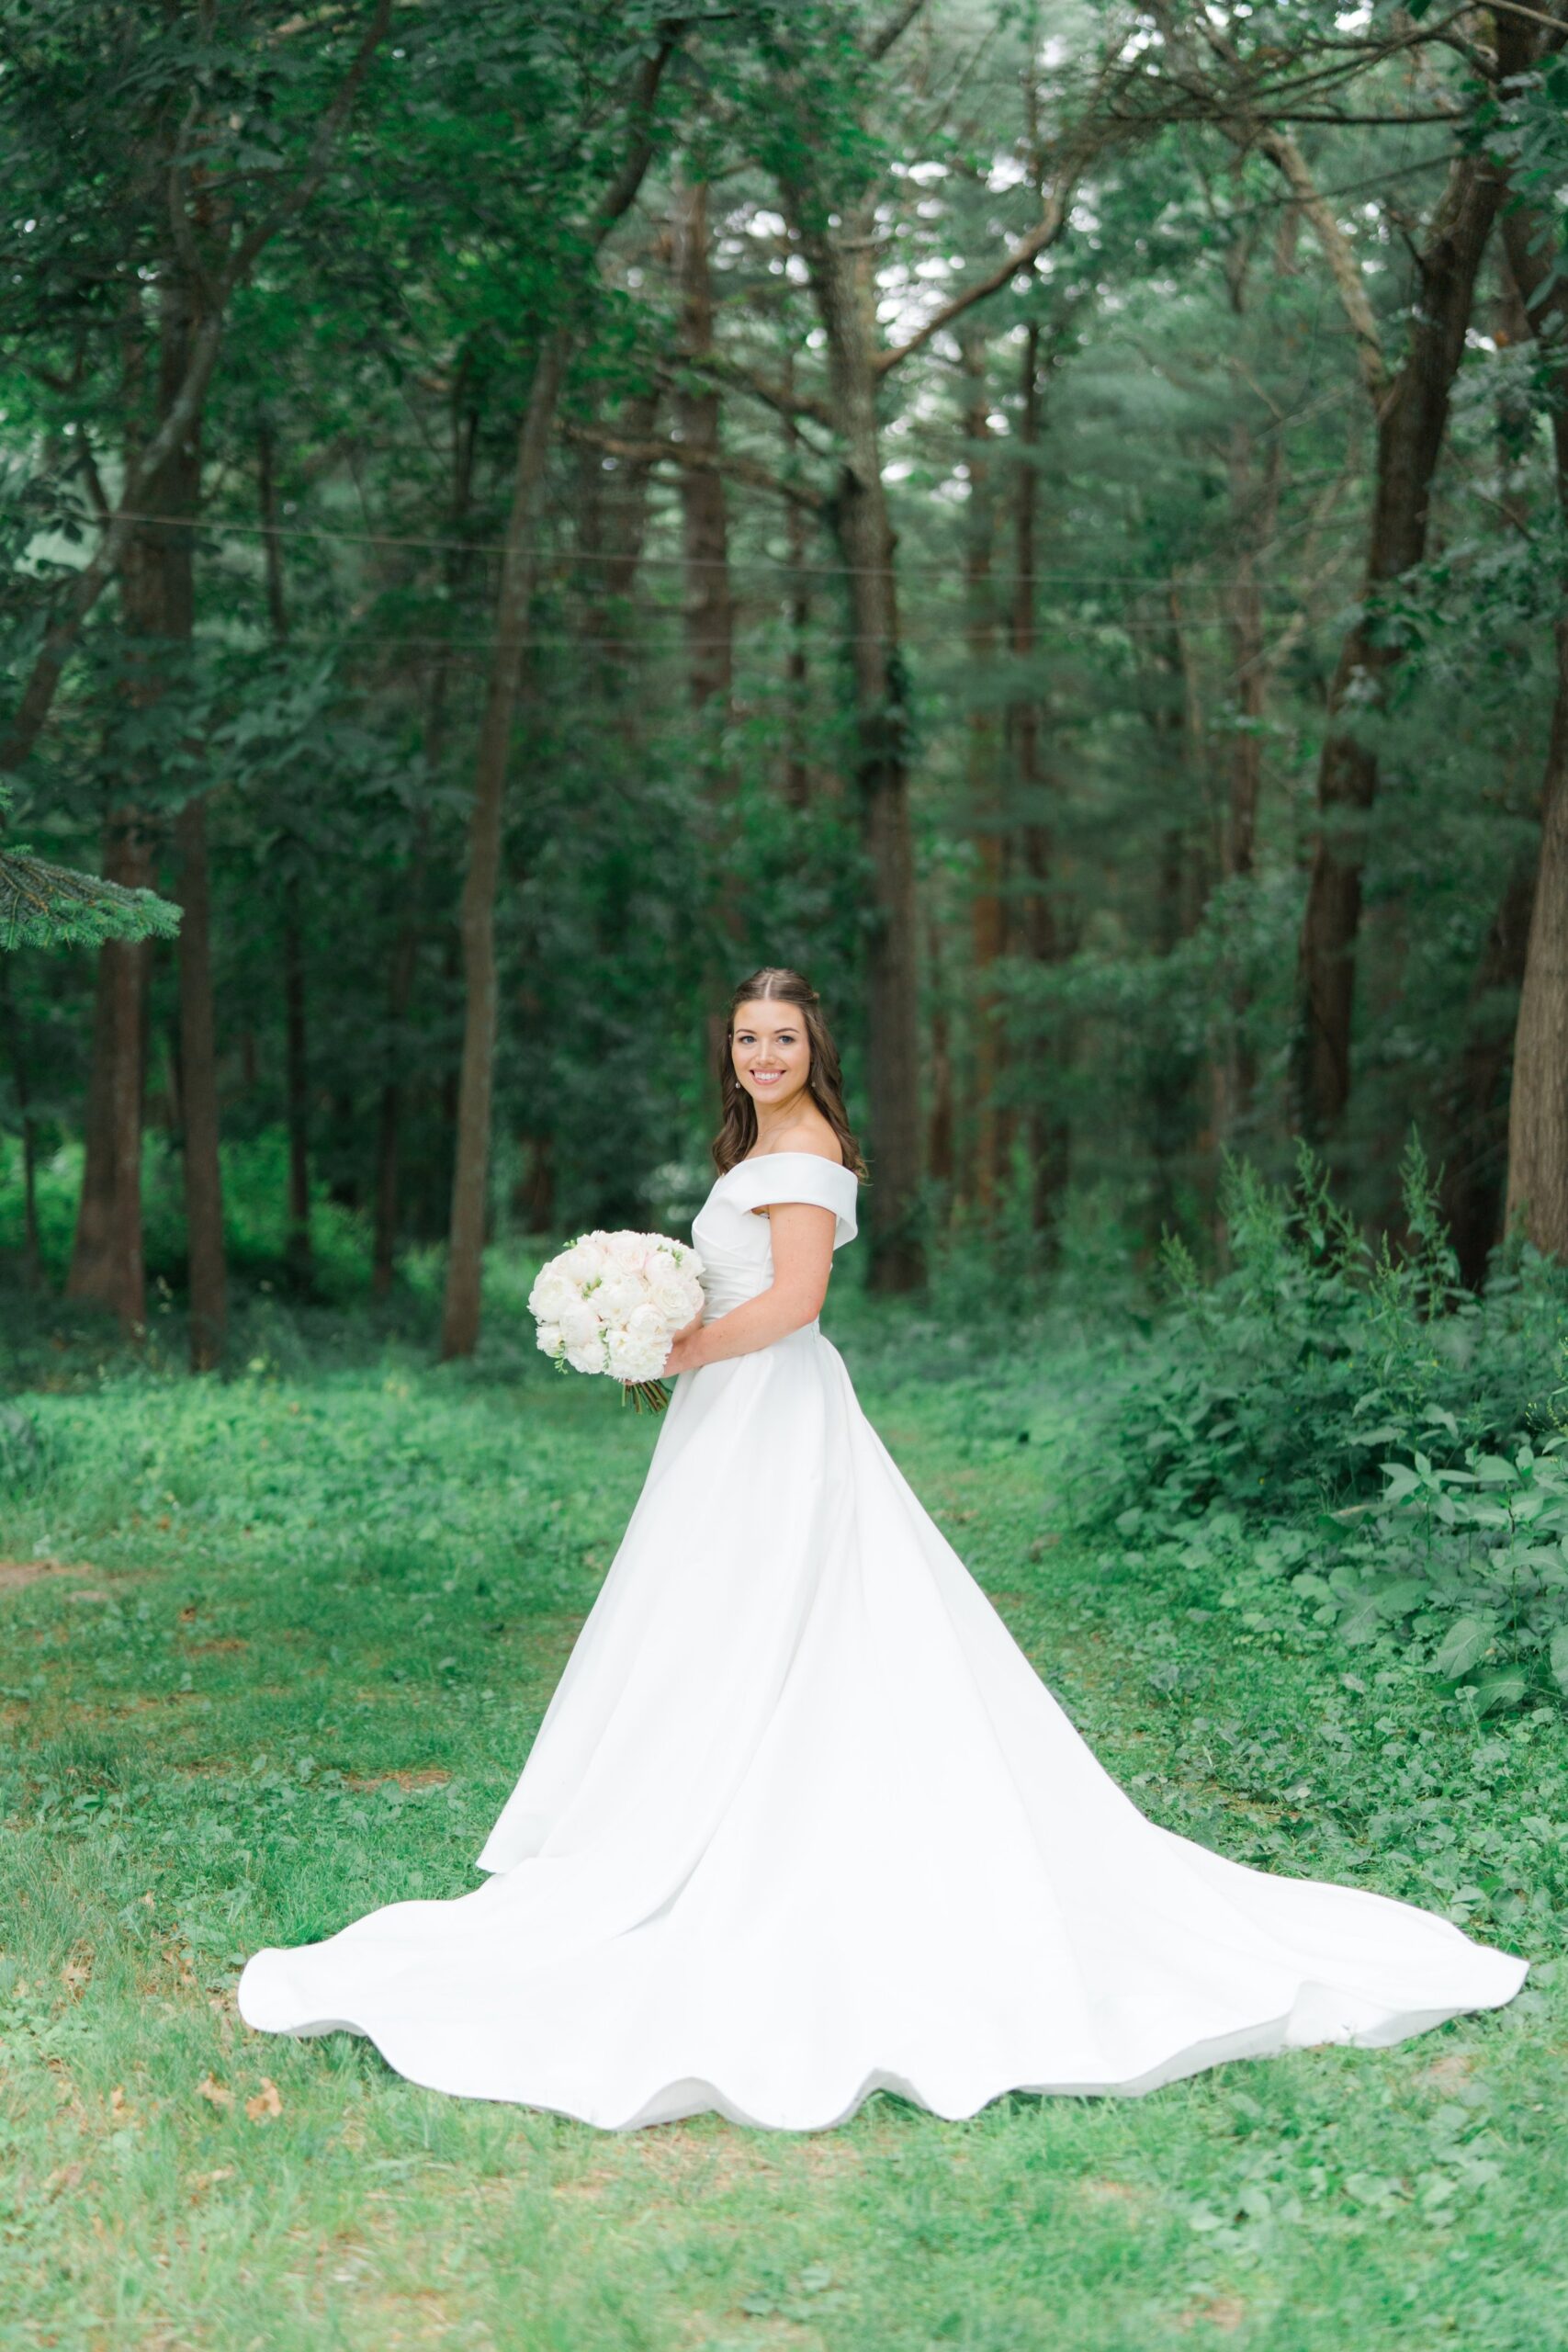 Wedding day bridal portrait in lush greenery on the grounds of the Bradley Estate. Off the shoulder wedding dress with long flowing train.